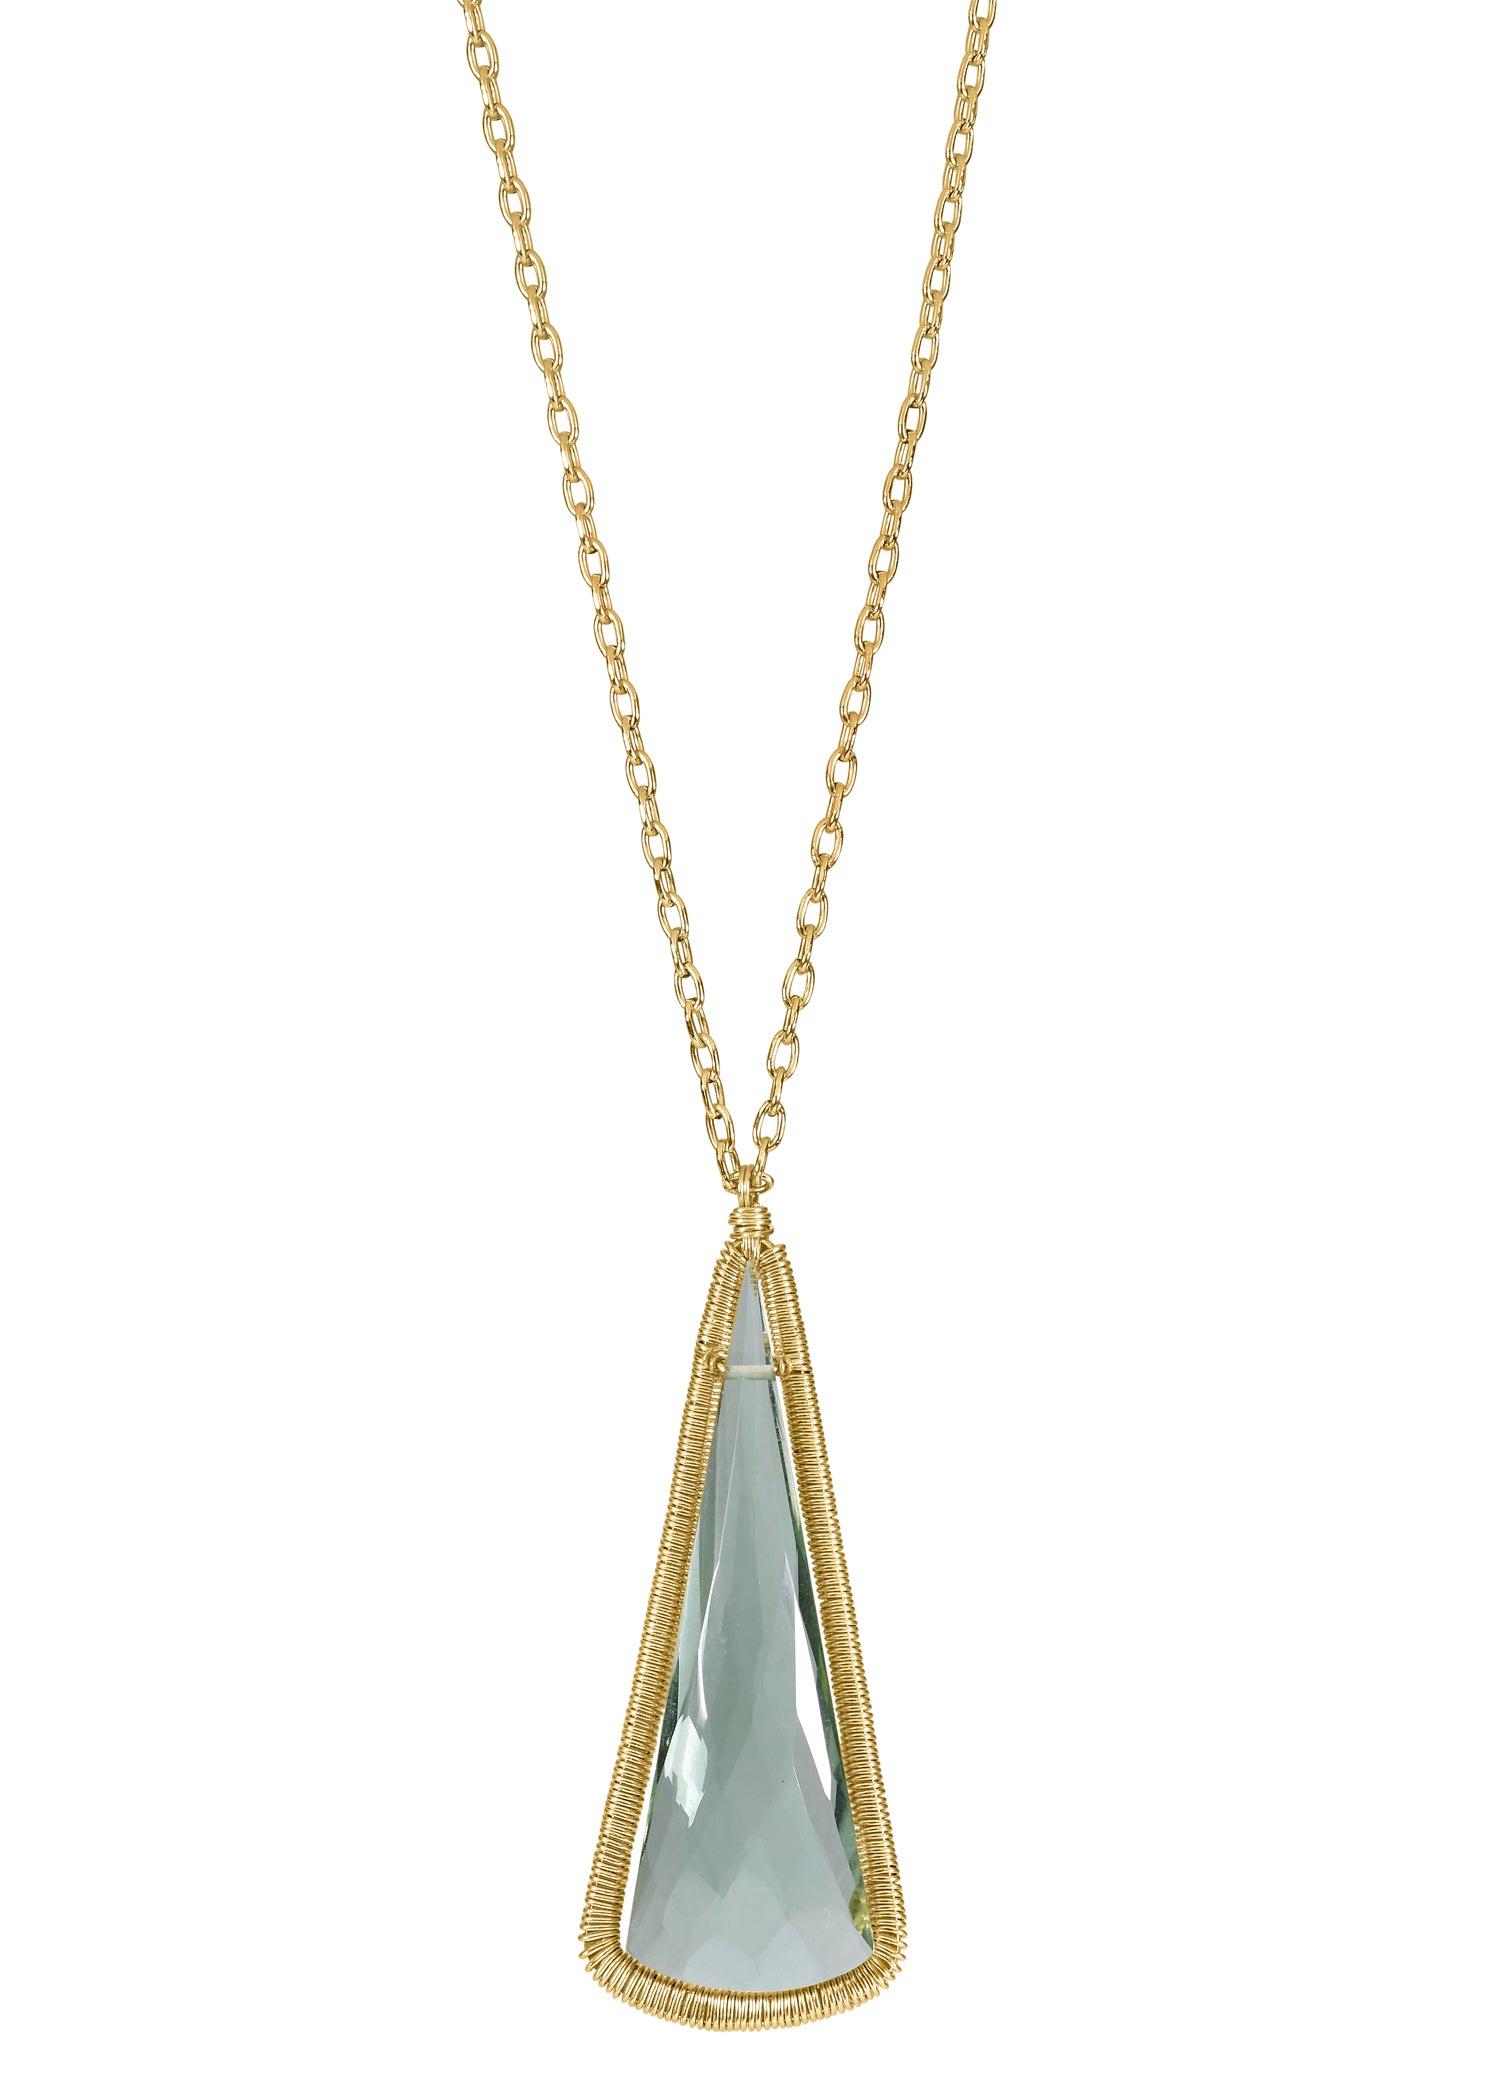 Green quartz 14k gold fill Necklace measures 30" in length Pendant measures 1-1/2" in length and 5/8" in width at the widest point Handmade in our Los Angeles studio